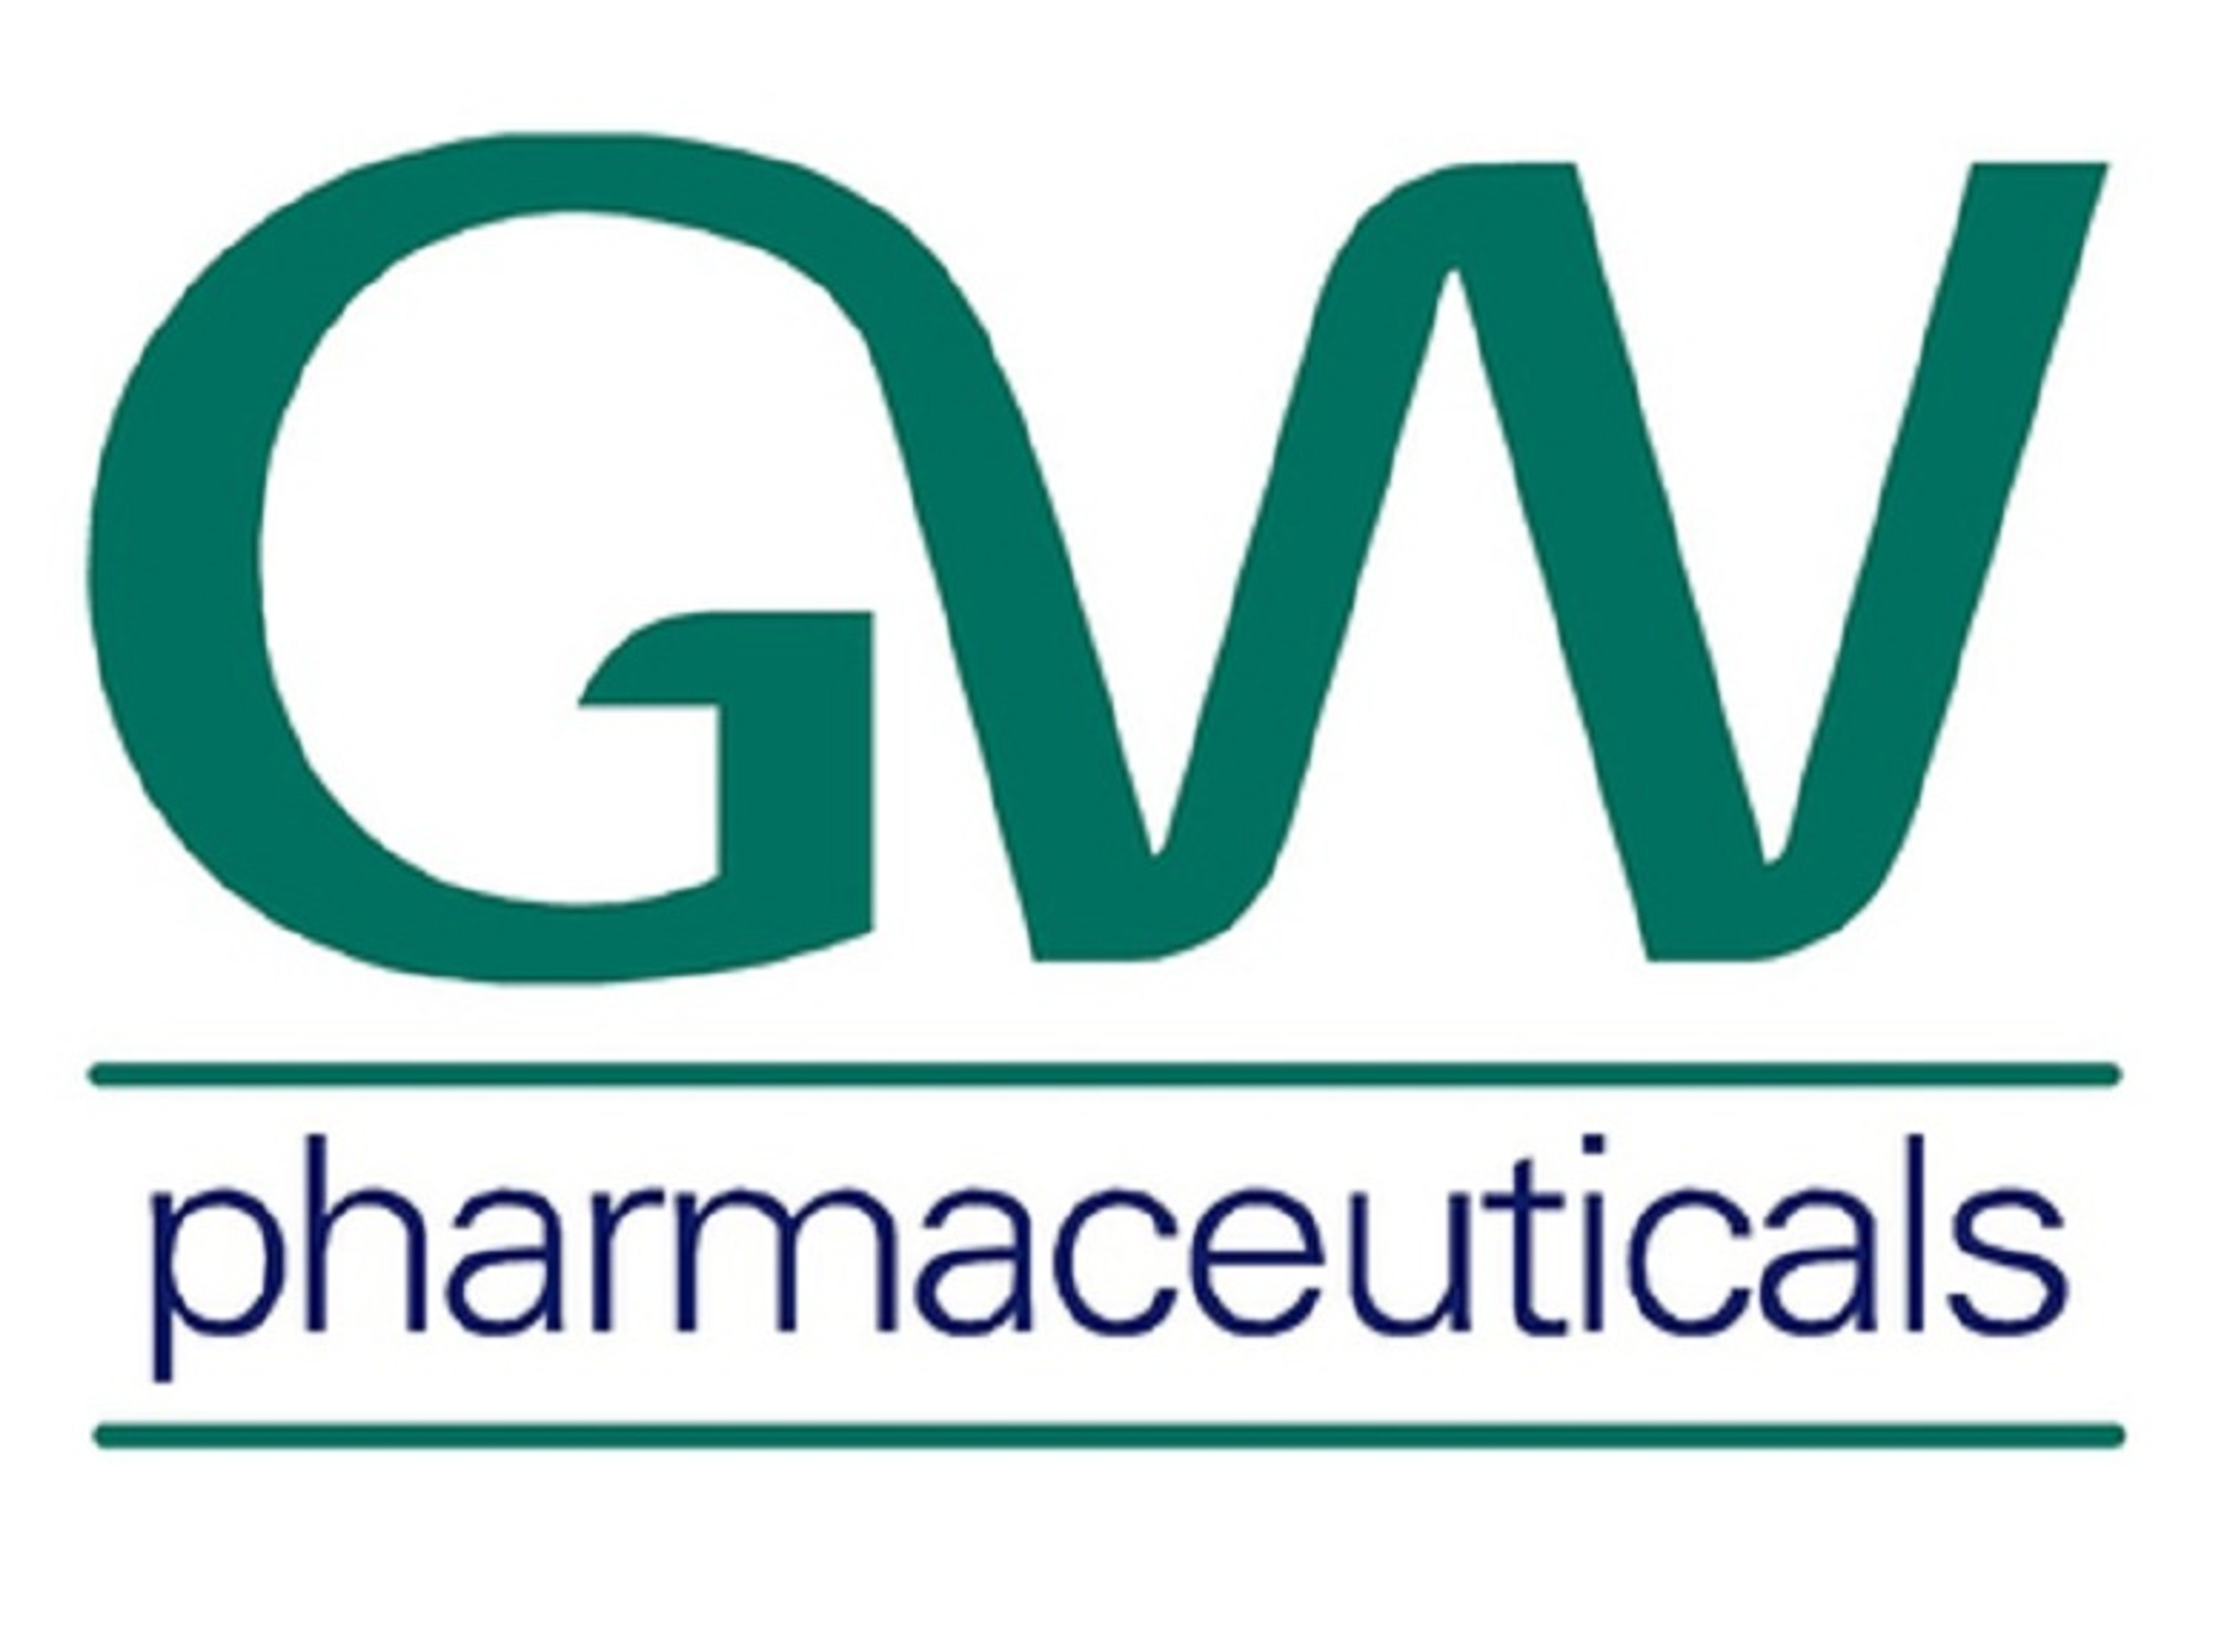 GW Pharmaceuticals Revenue Hits $137M, Tests Another Cannabis Plant-Based Drug